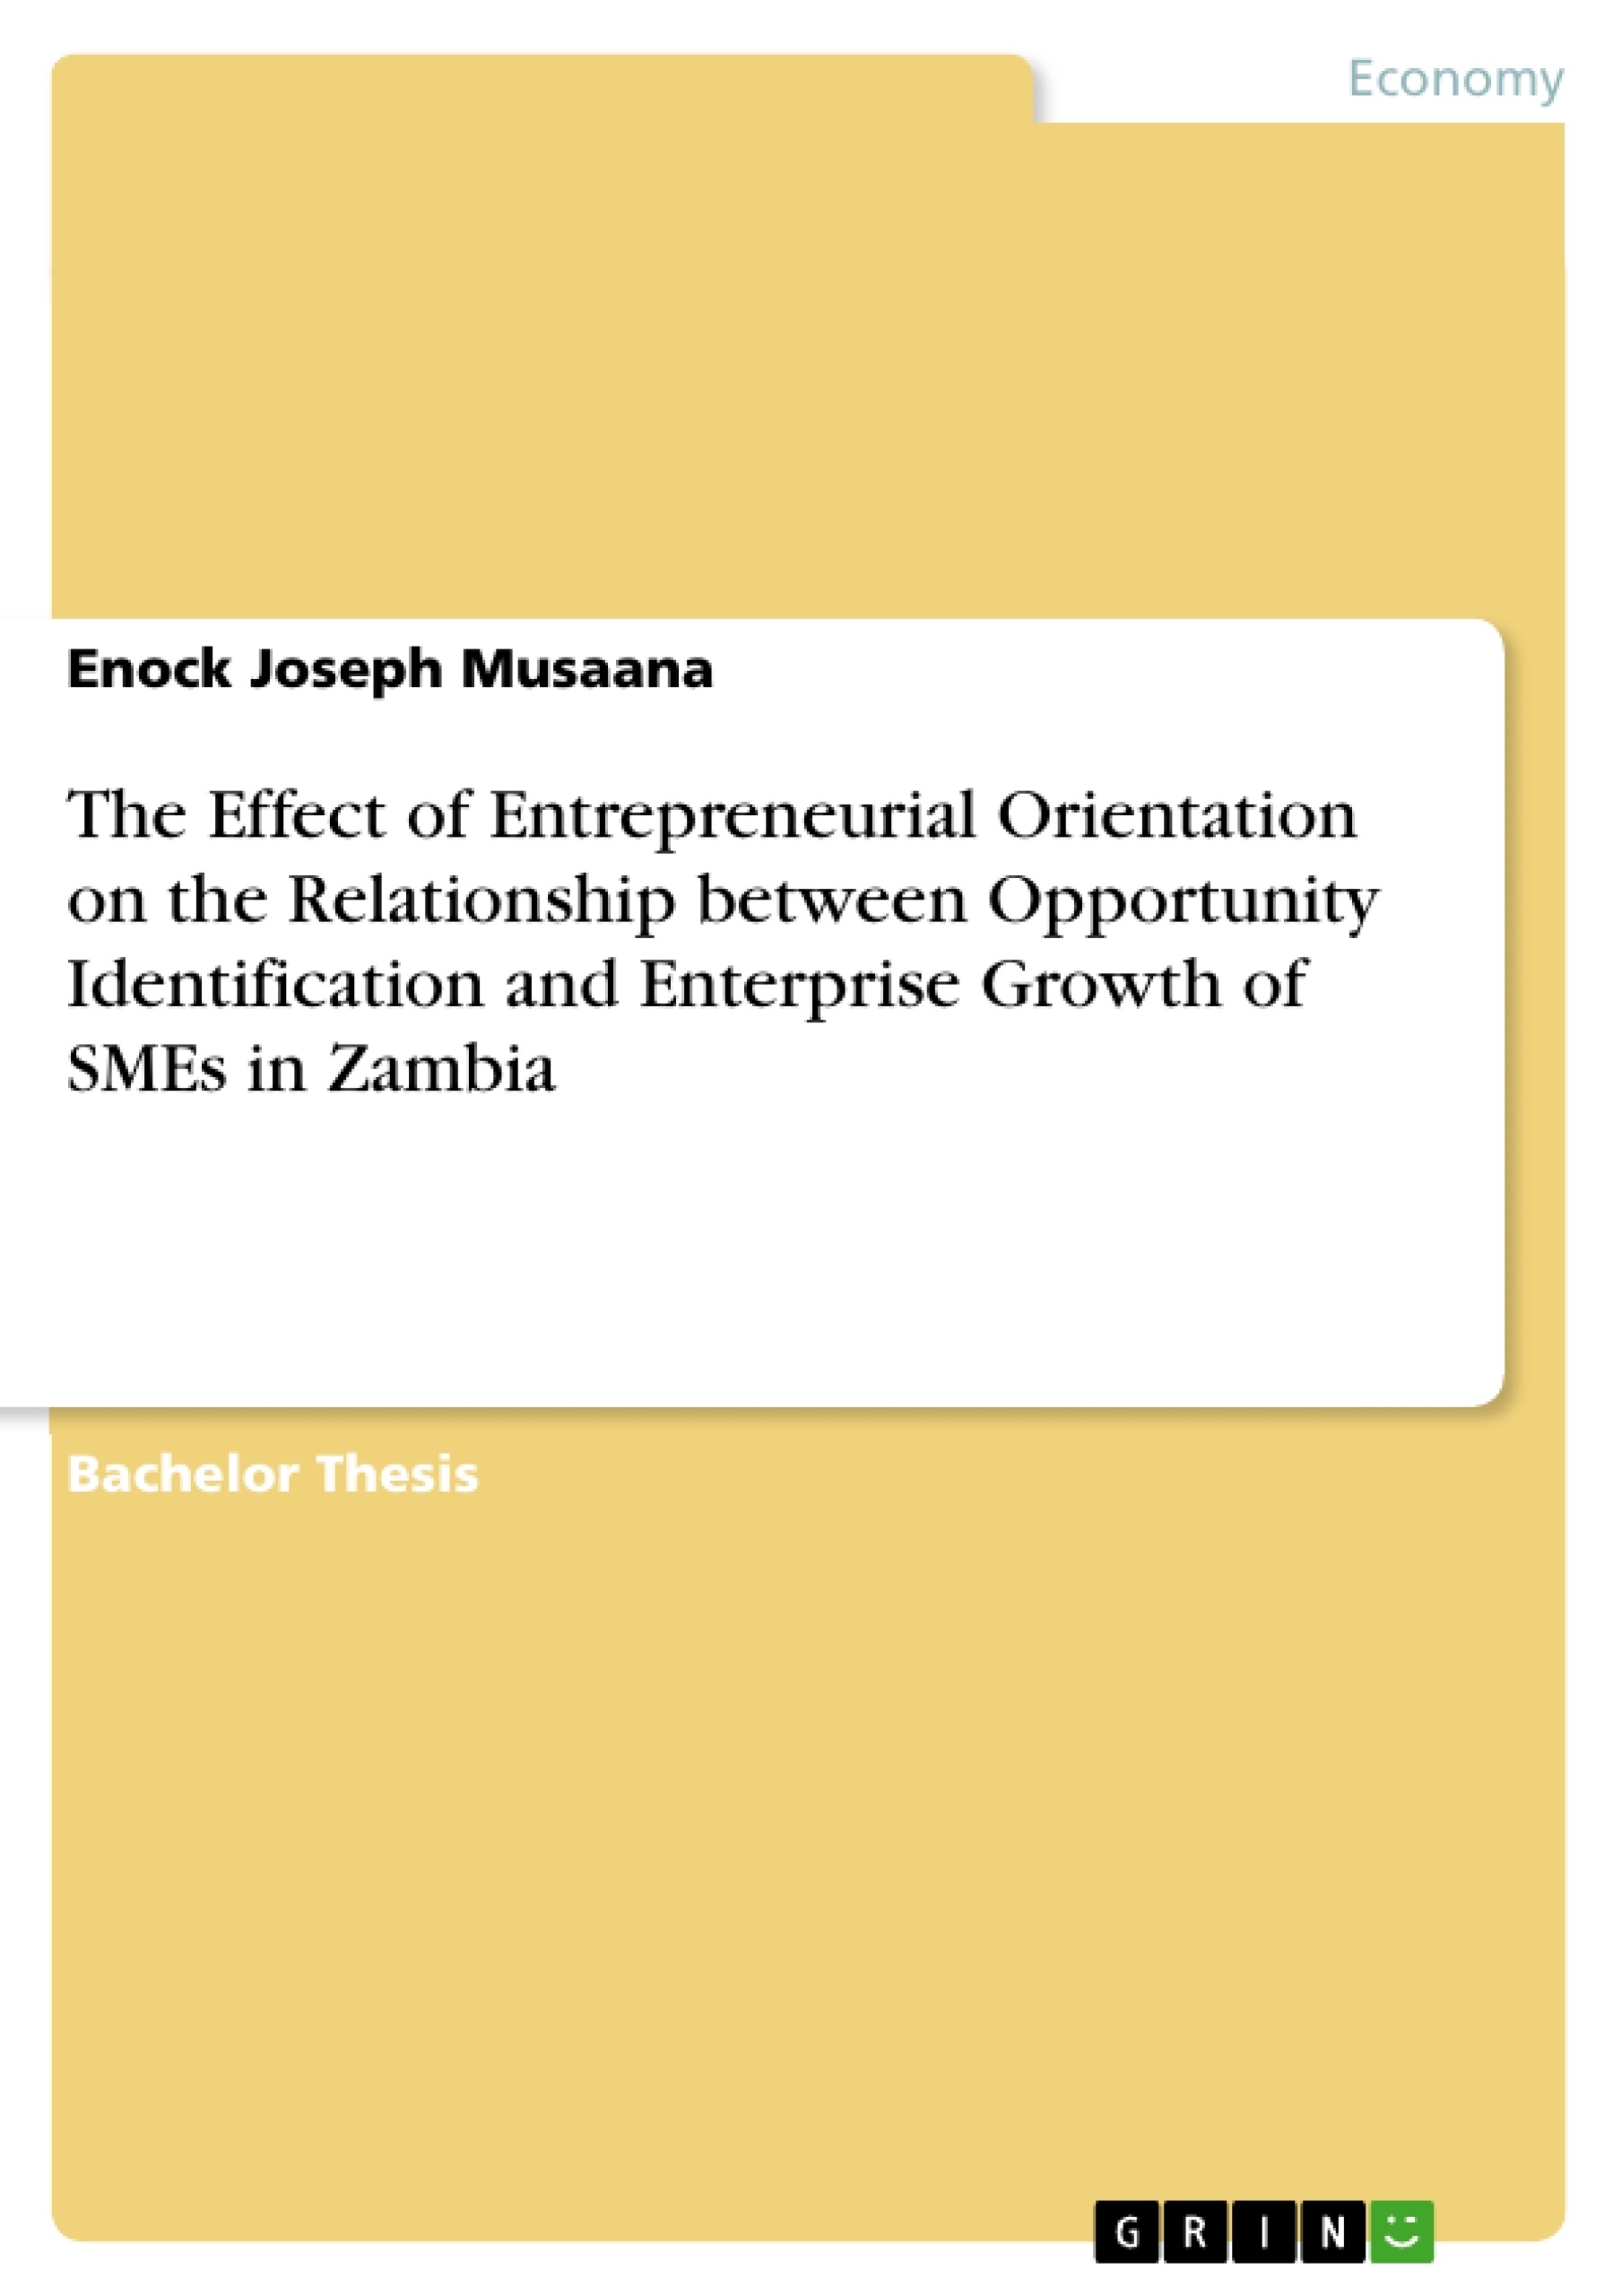 Título: The Effect of Entrepreneurial Orientation on the Relationship between Opportunity Identification and Enterprise Growth of SMEs in Zambia